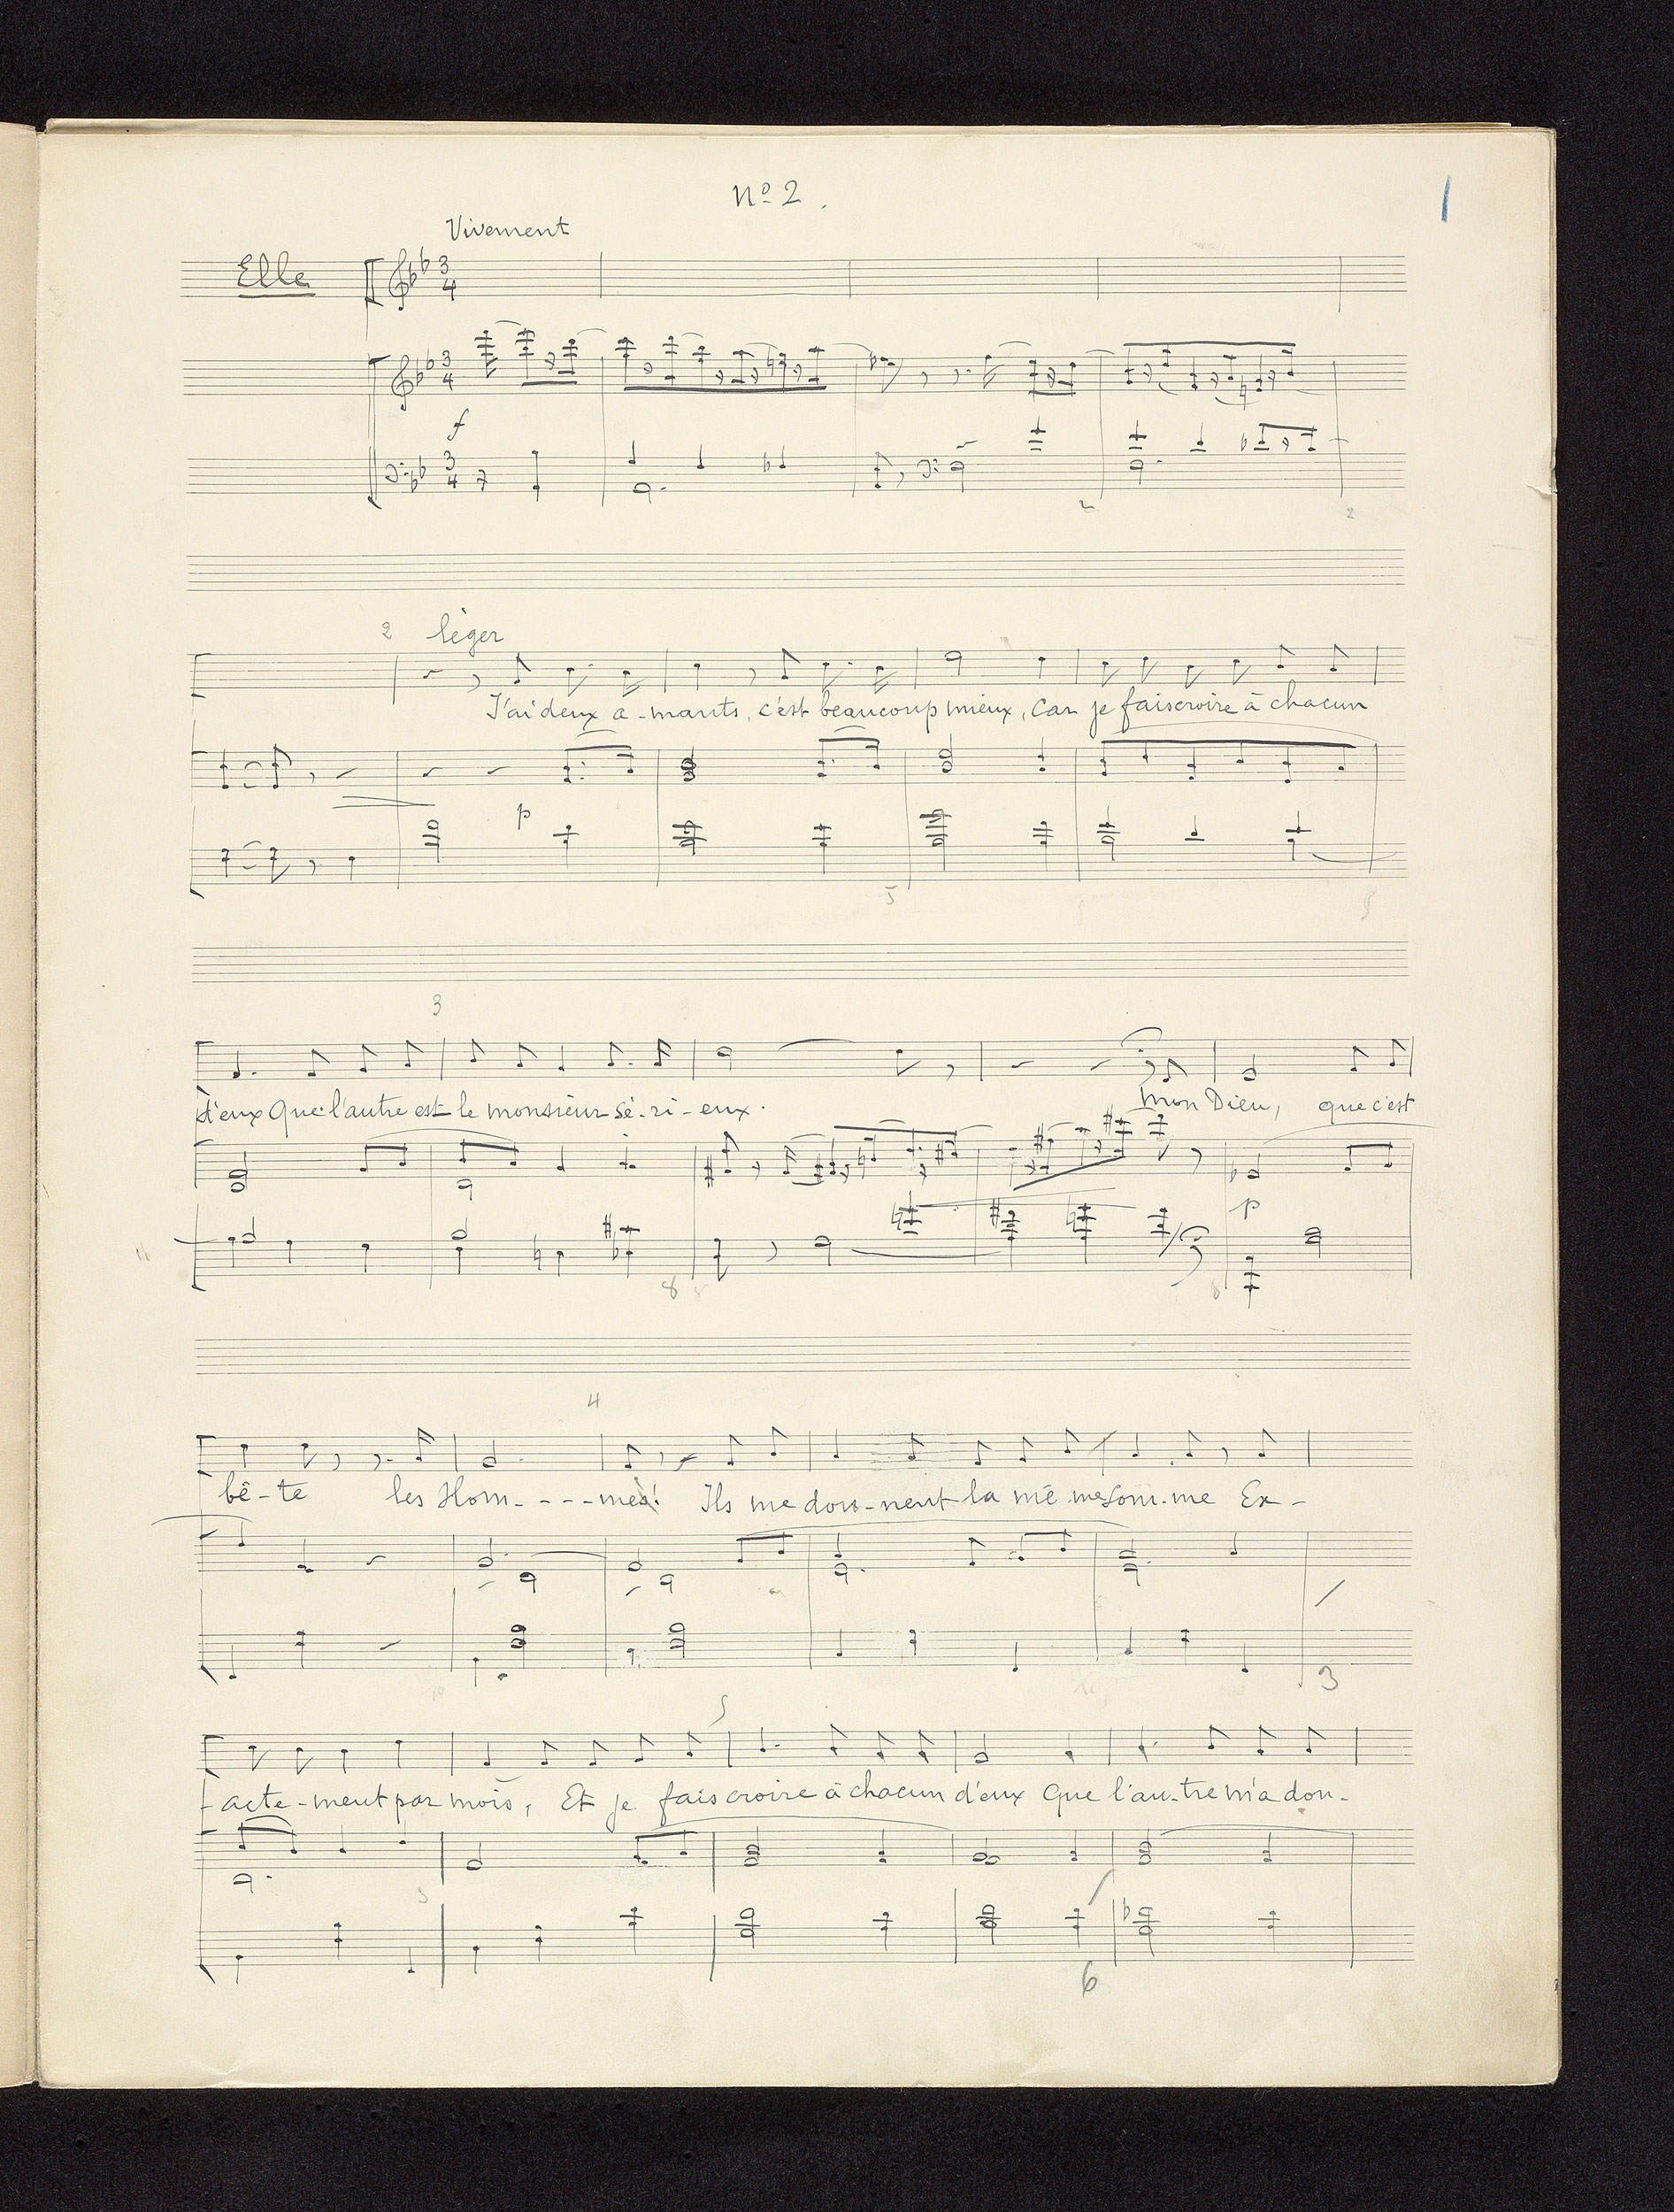 Messager Andre Amour Masque Vocal Score Act I No 2 J Ai Deux Amants P 1 A The Morgan Library Museum